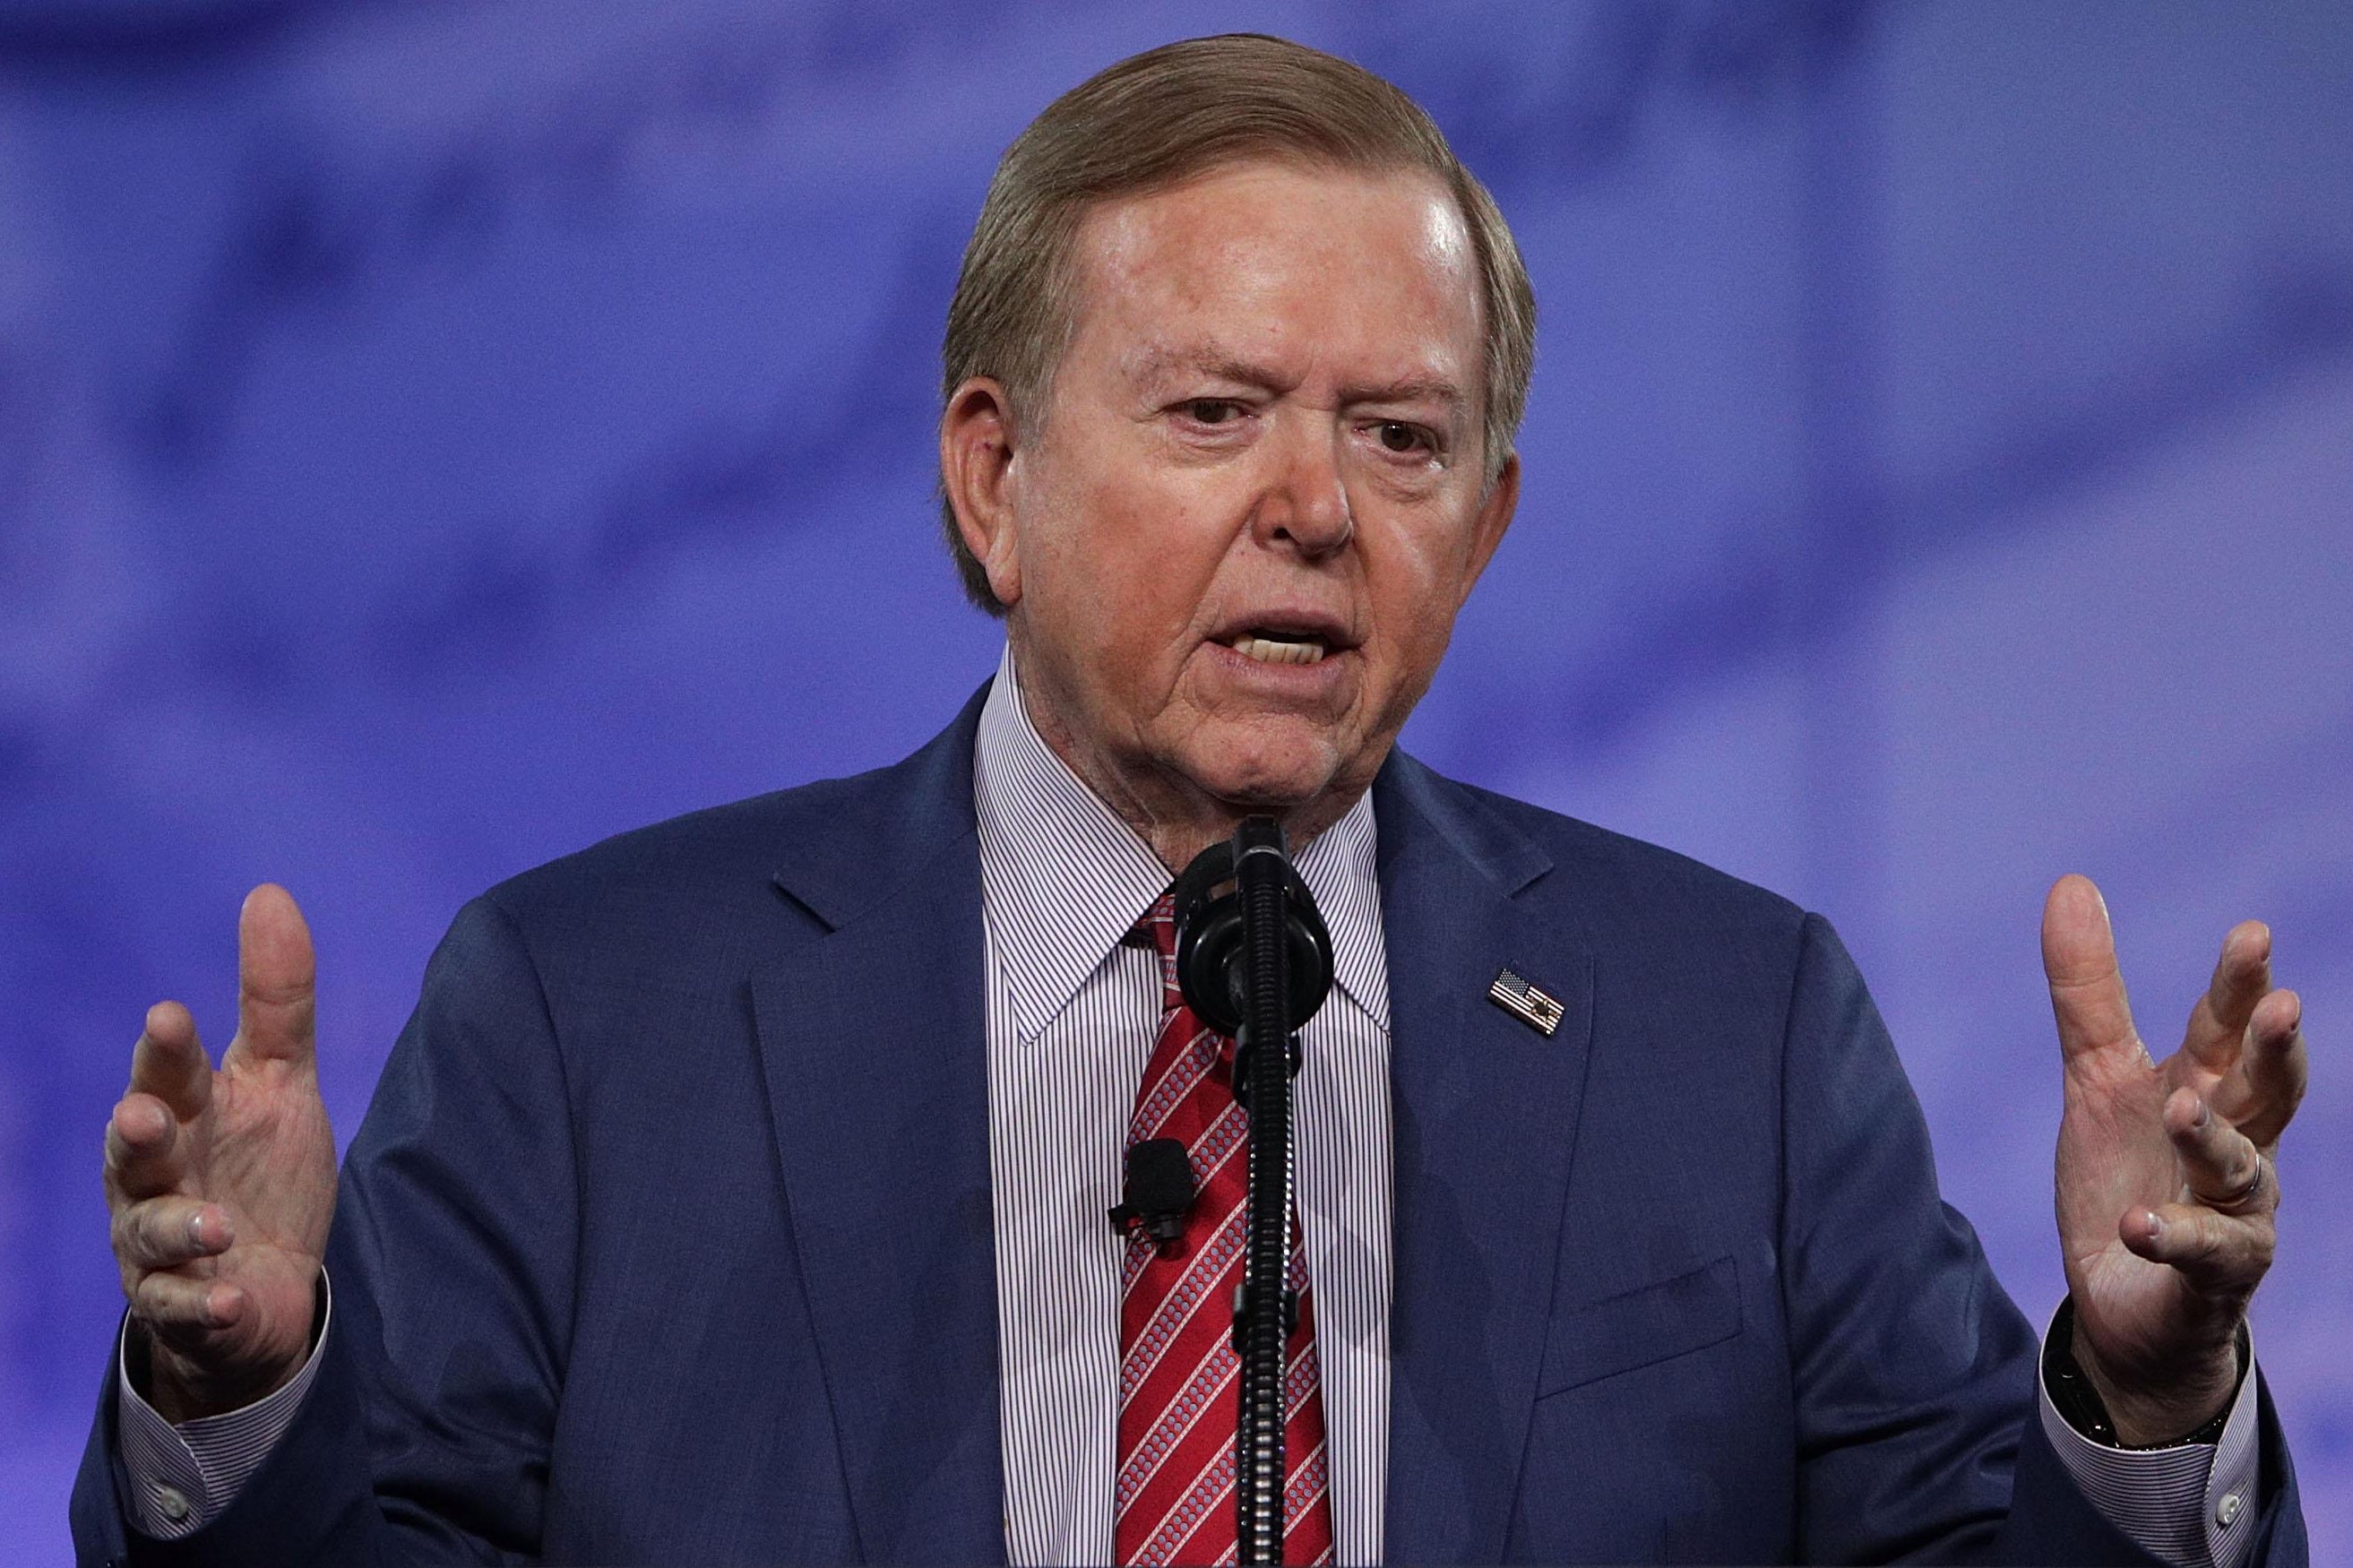 Lou Dobbs speaks during the Conservative Political Action Conference at the Gaylord National Resort and Convention Center February 24, 2017 in National Harbor, Maryland. 